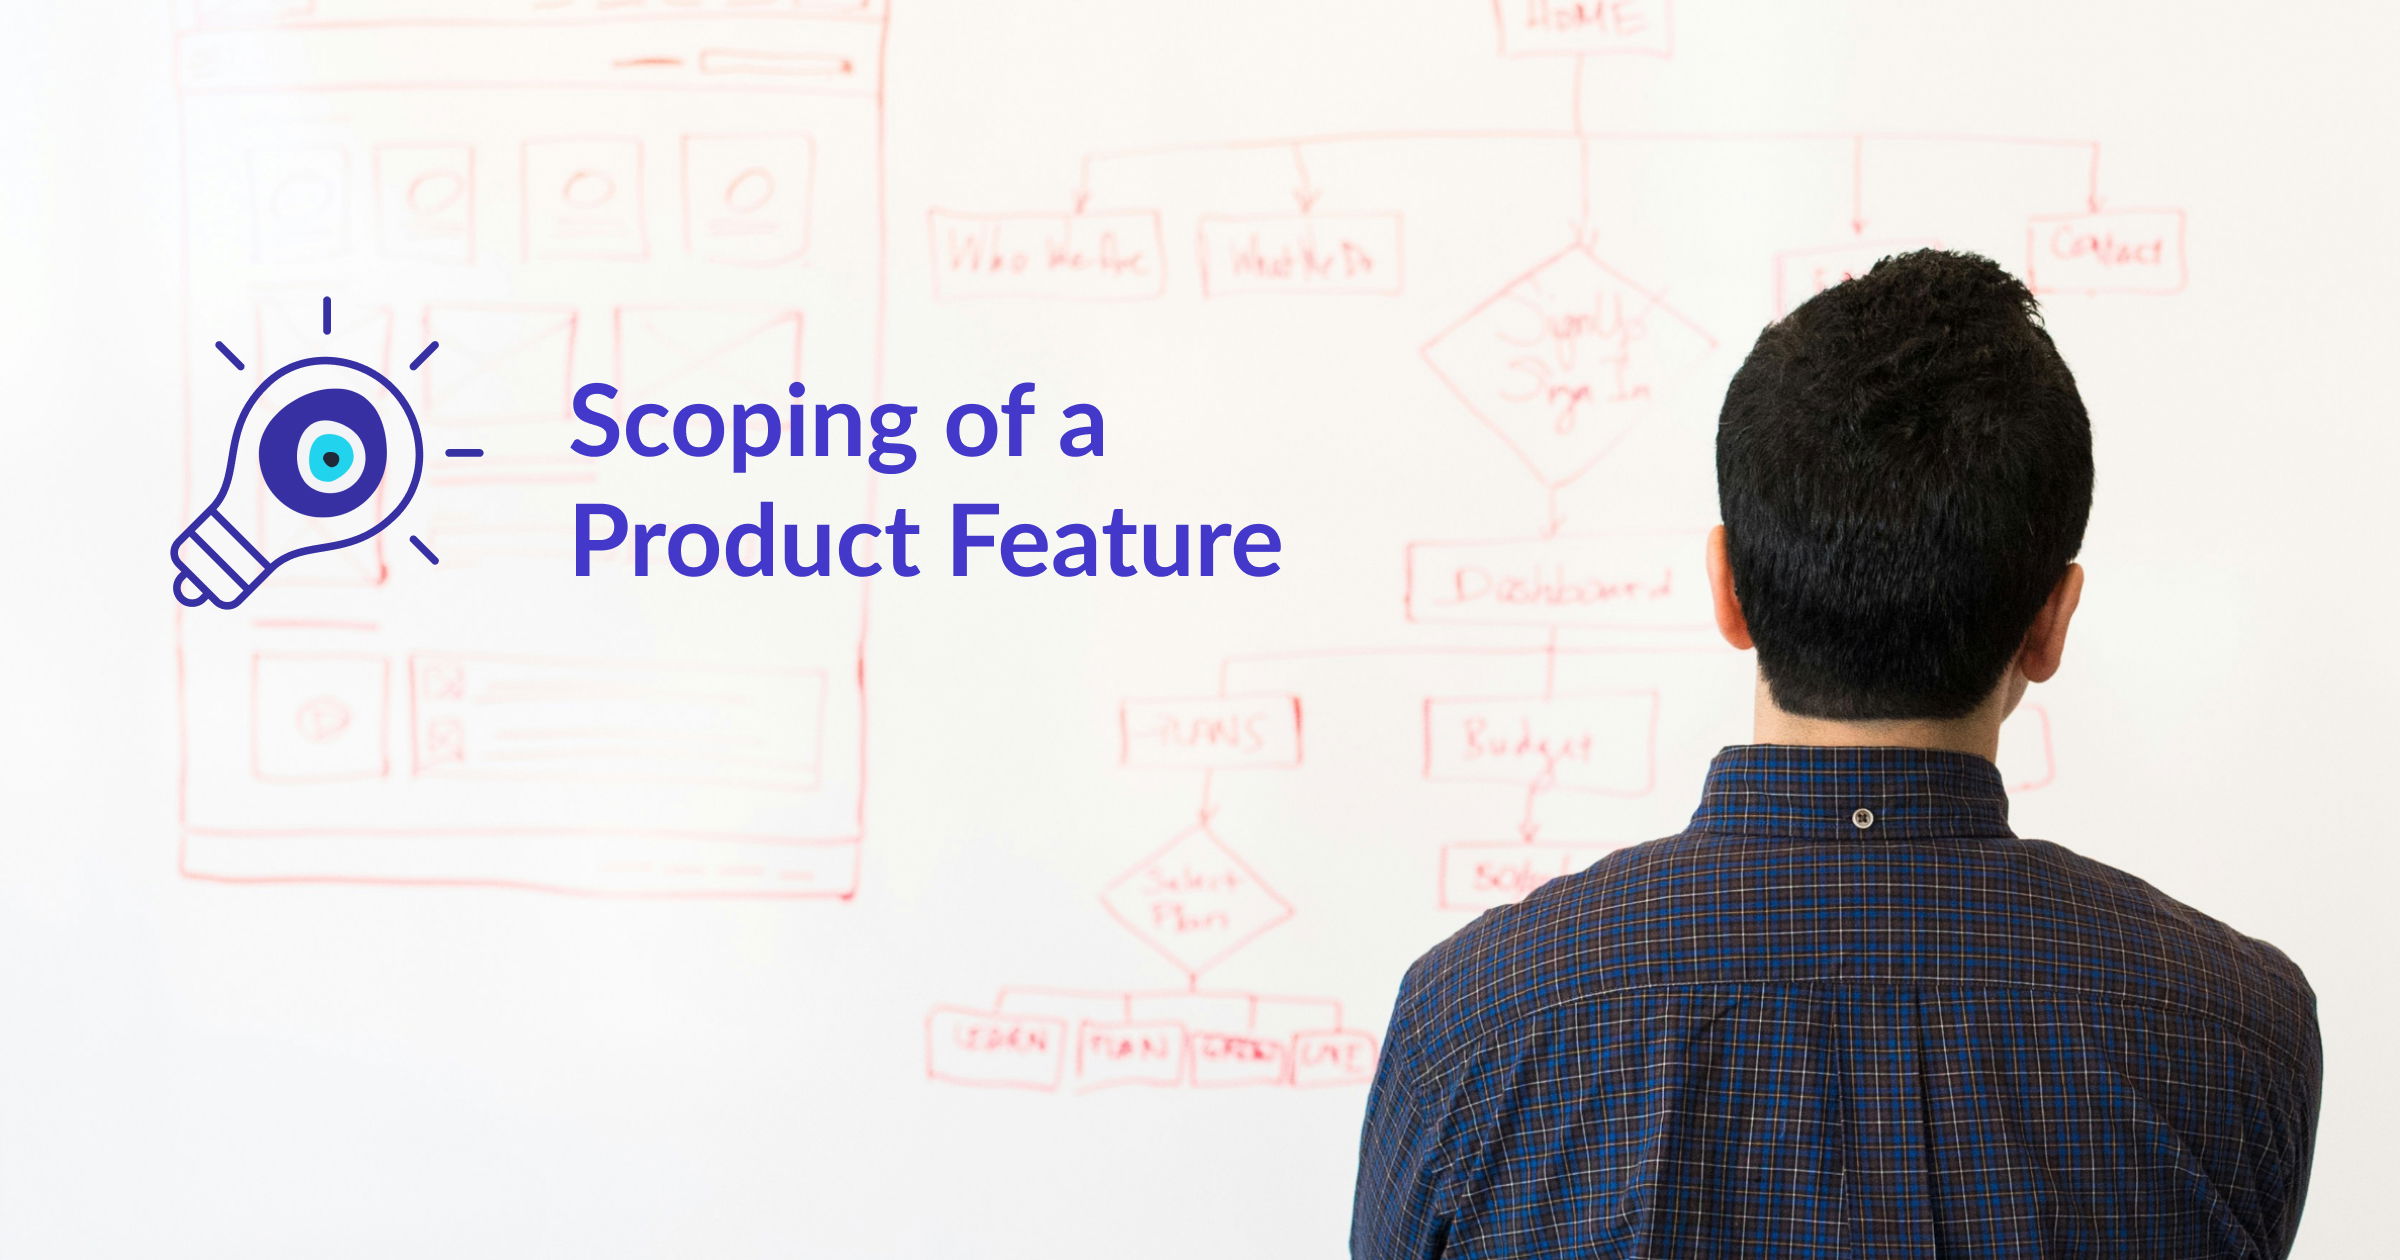 Text saying "Scoping of a product feature" and image of a man looking at a whiteboard with sketches